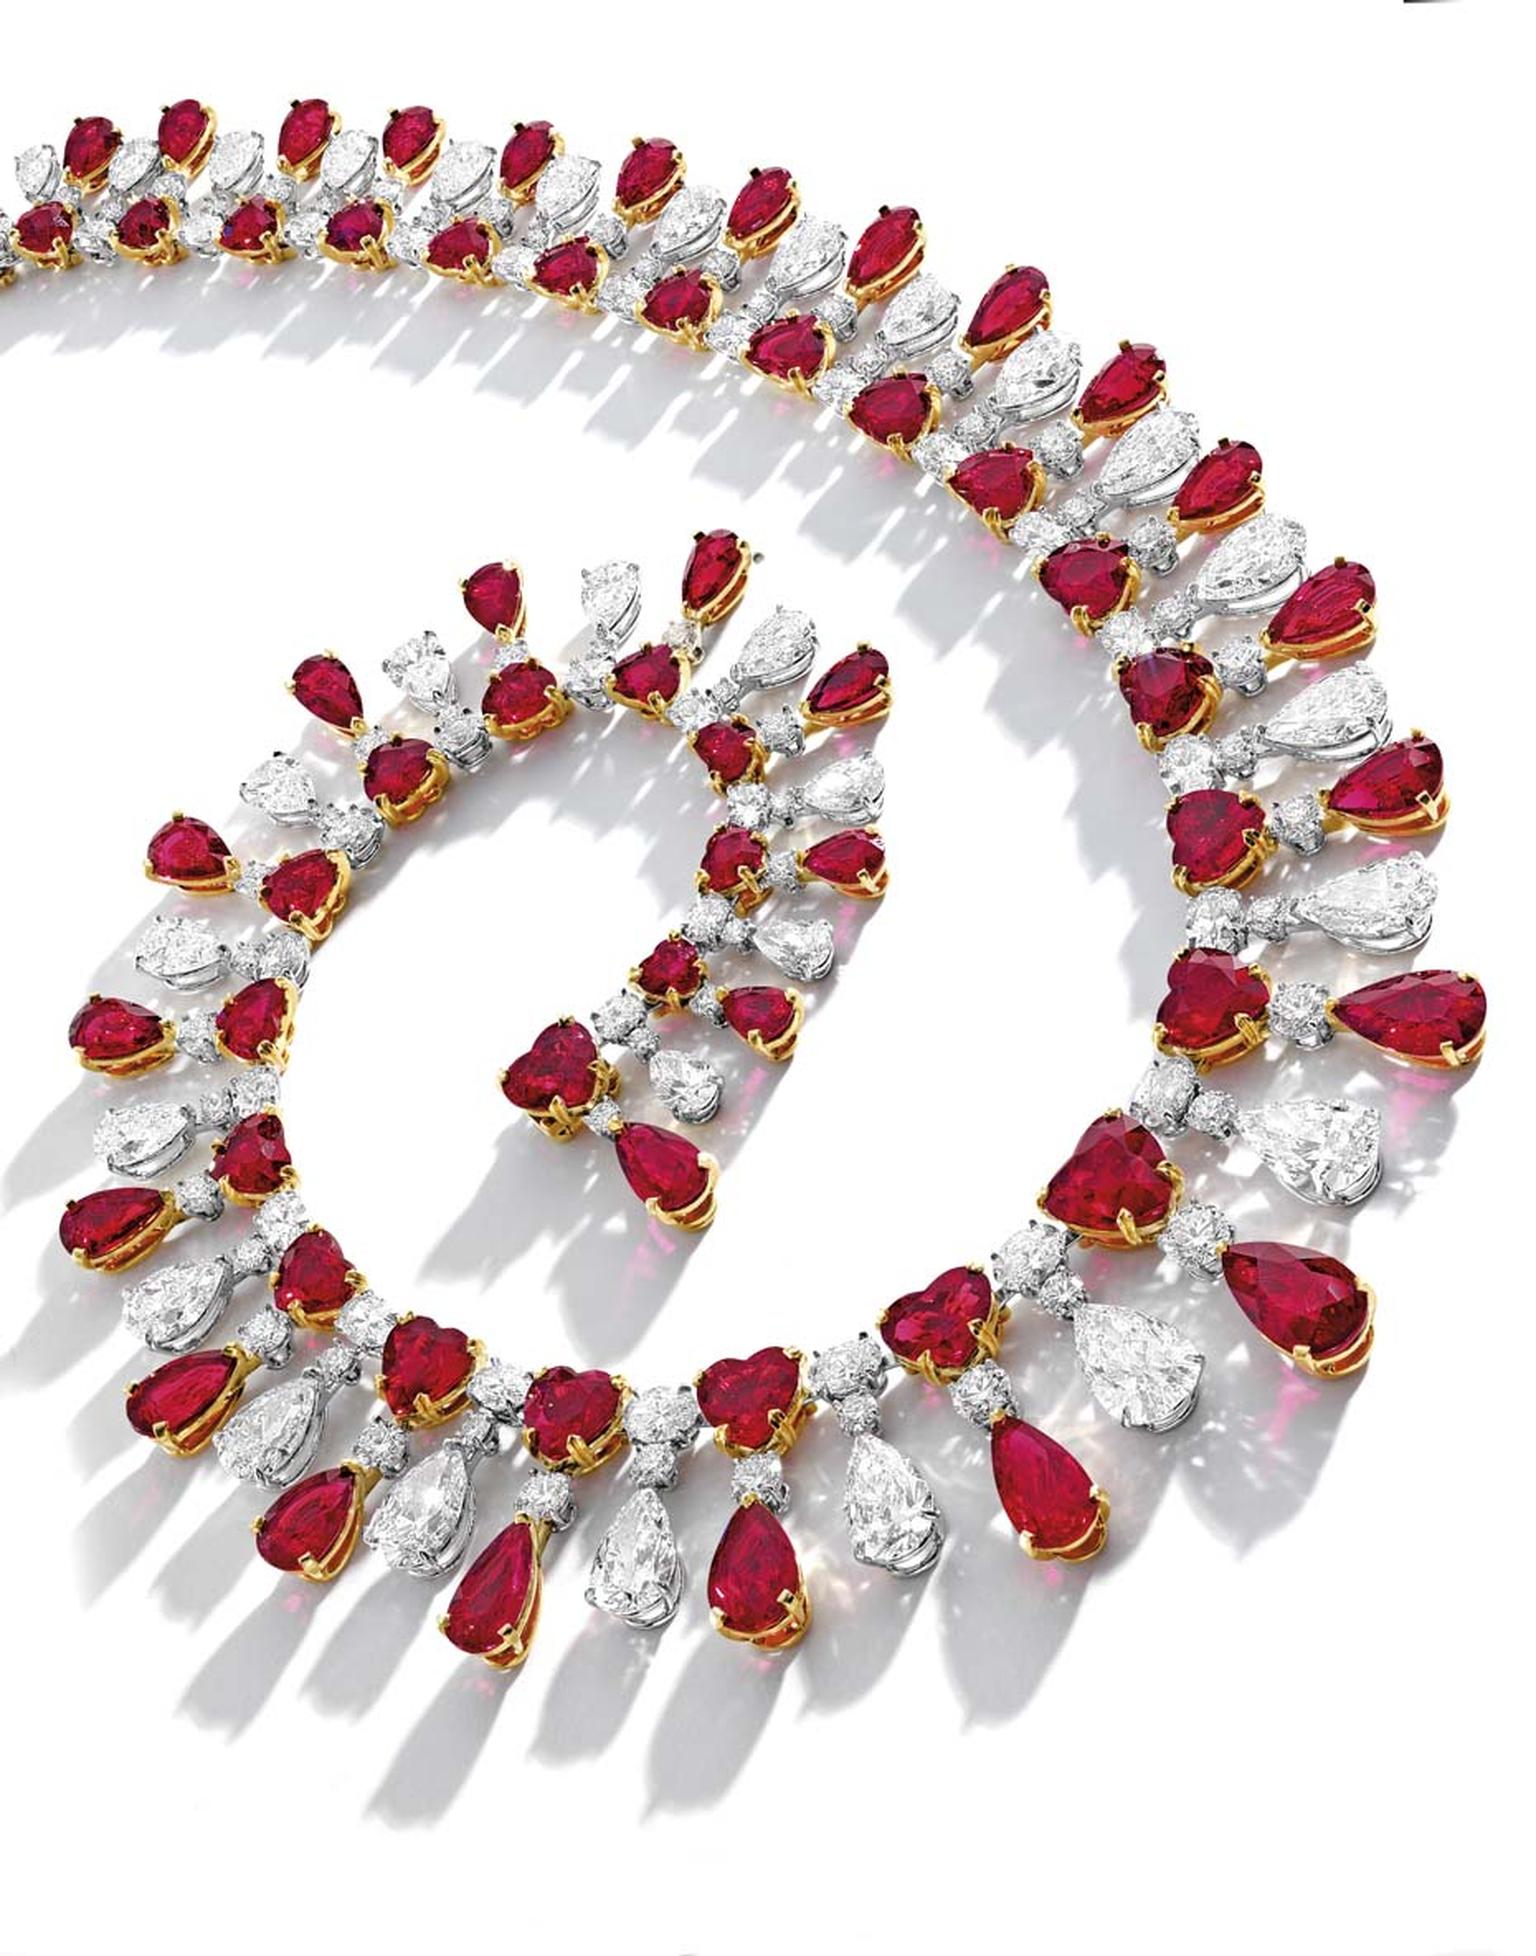 The Red Emperor necklace featuring Burmese rubies and diamonds. The rubies include fine needle-shaped inclusions, which perfectly diffuse light and is further enhanced by brilliant-cut, pear-shaped and oval diamonds. Sold at Sotheby's Hong Kong for US$9,9